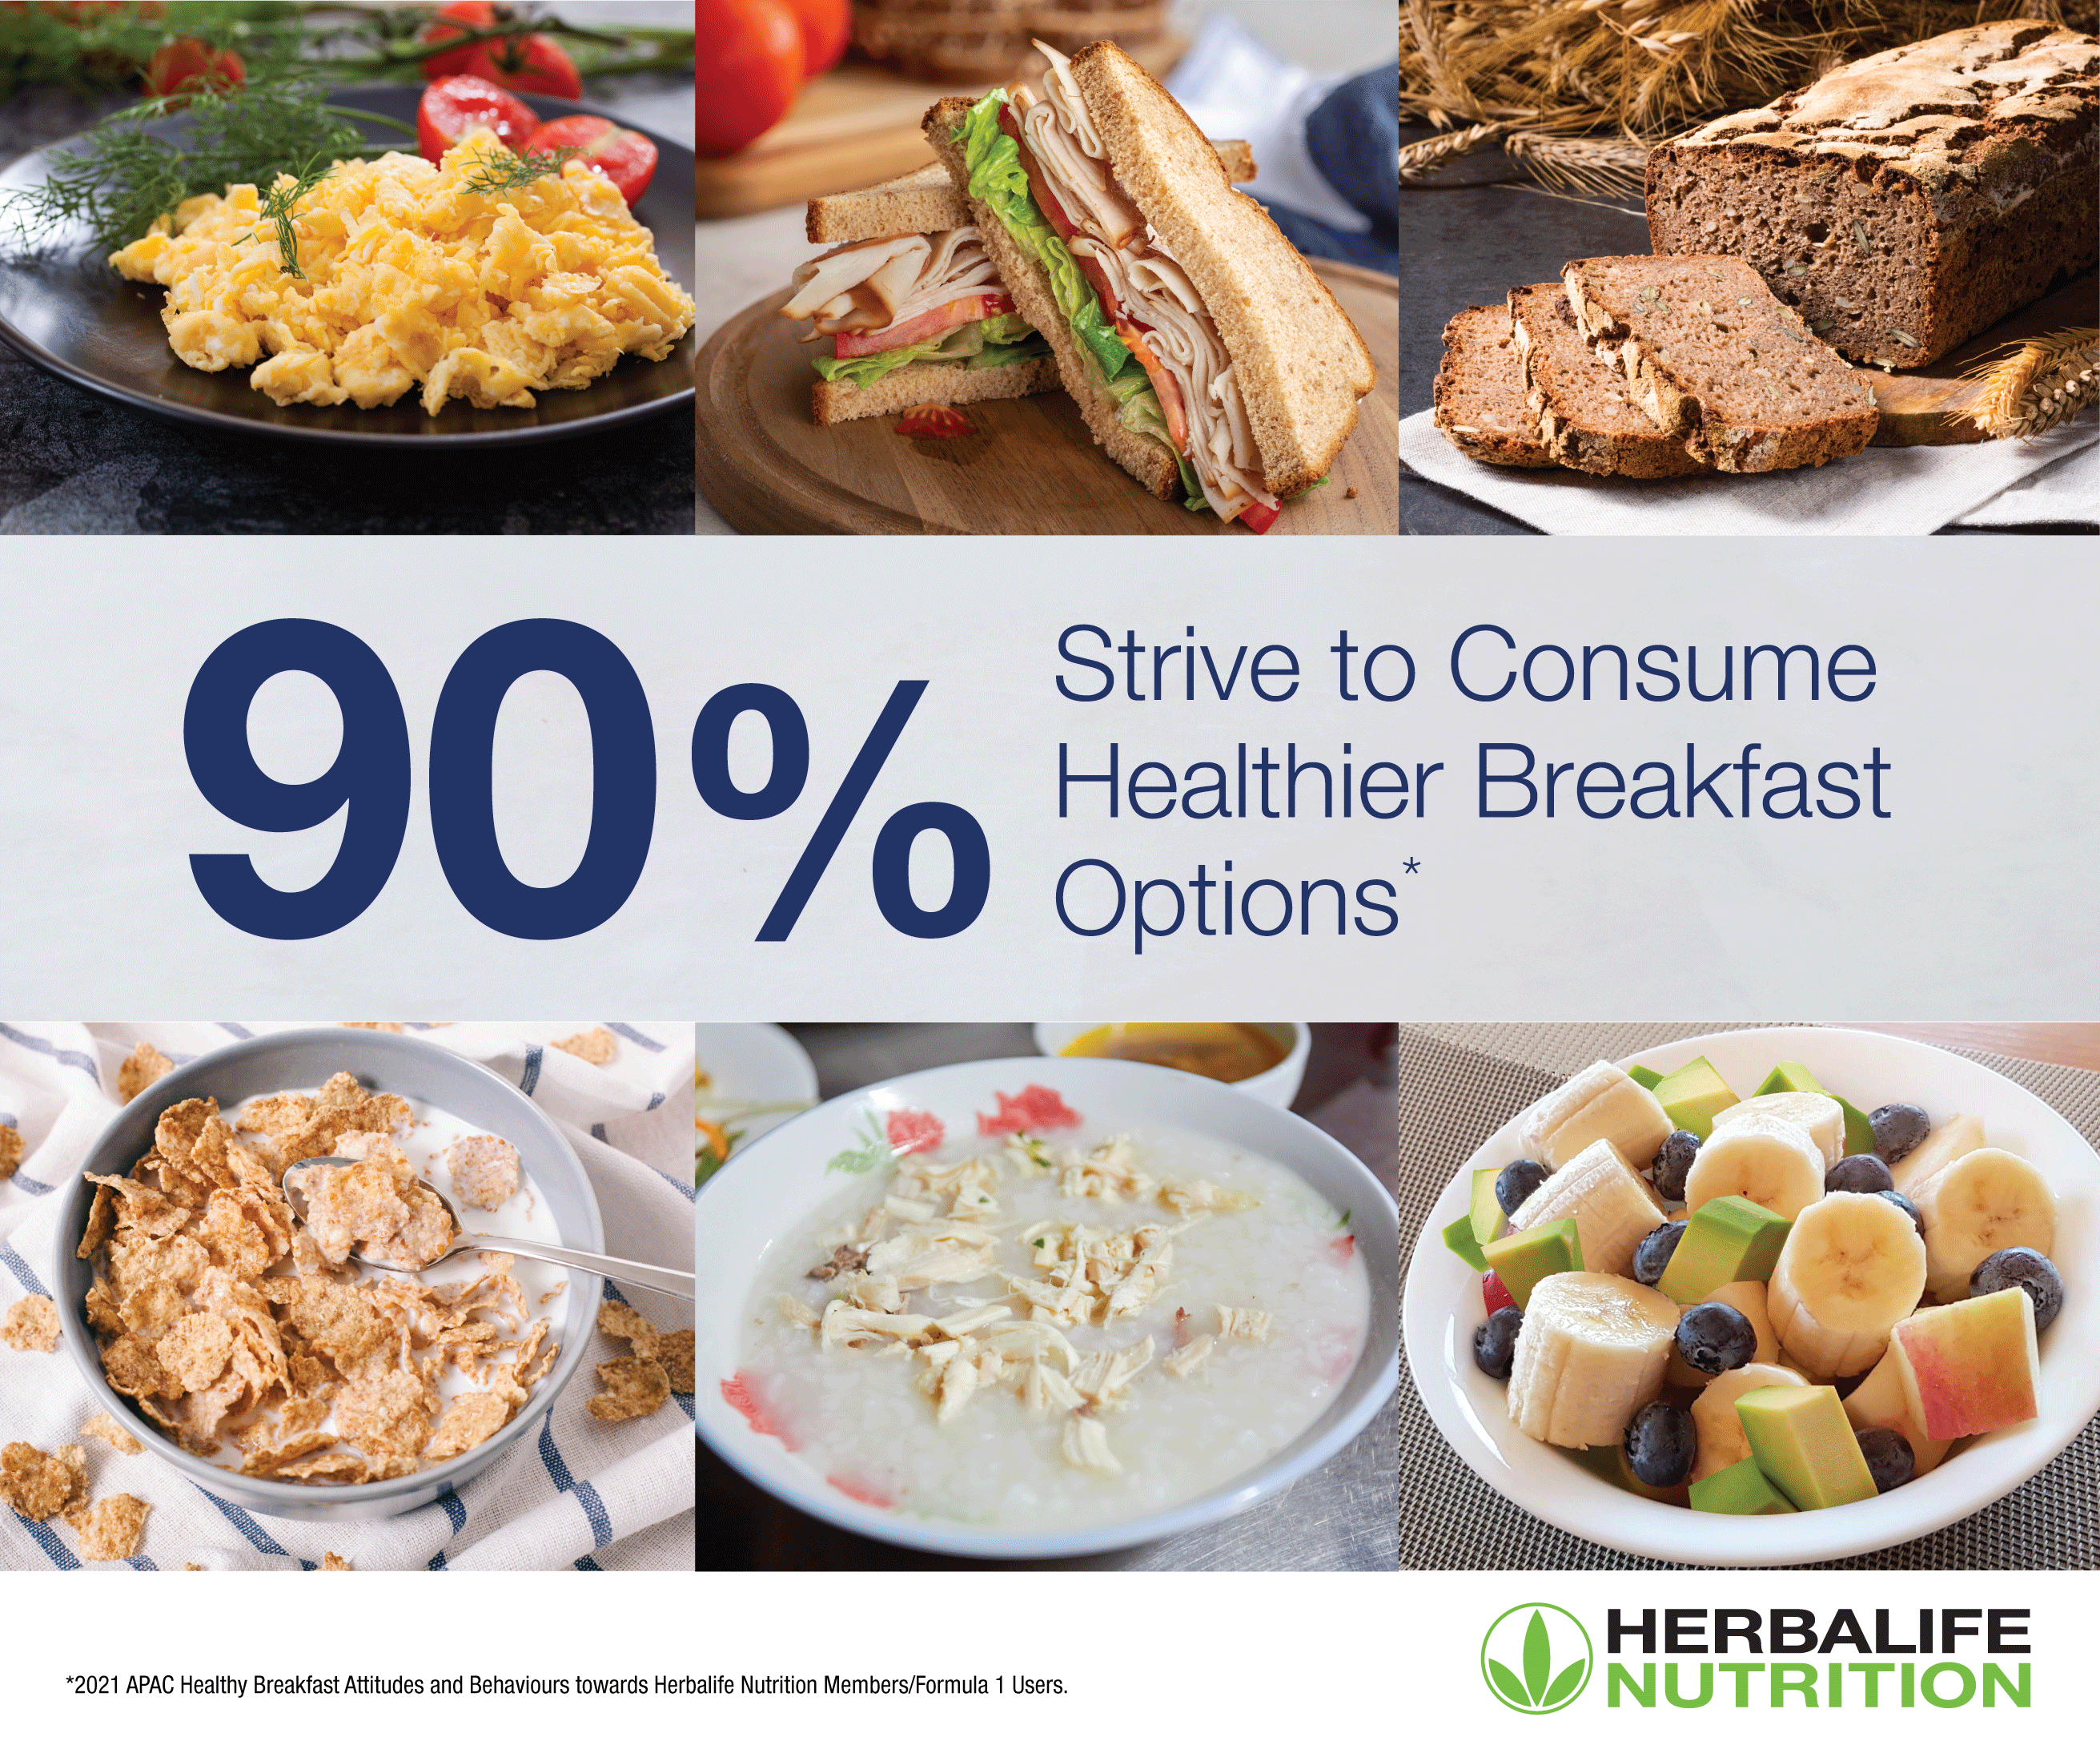 #DidYouKnow that 90% of people strive to consume healthier breakfast options.